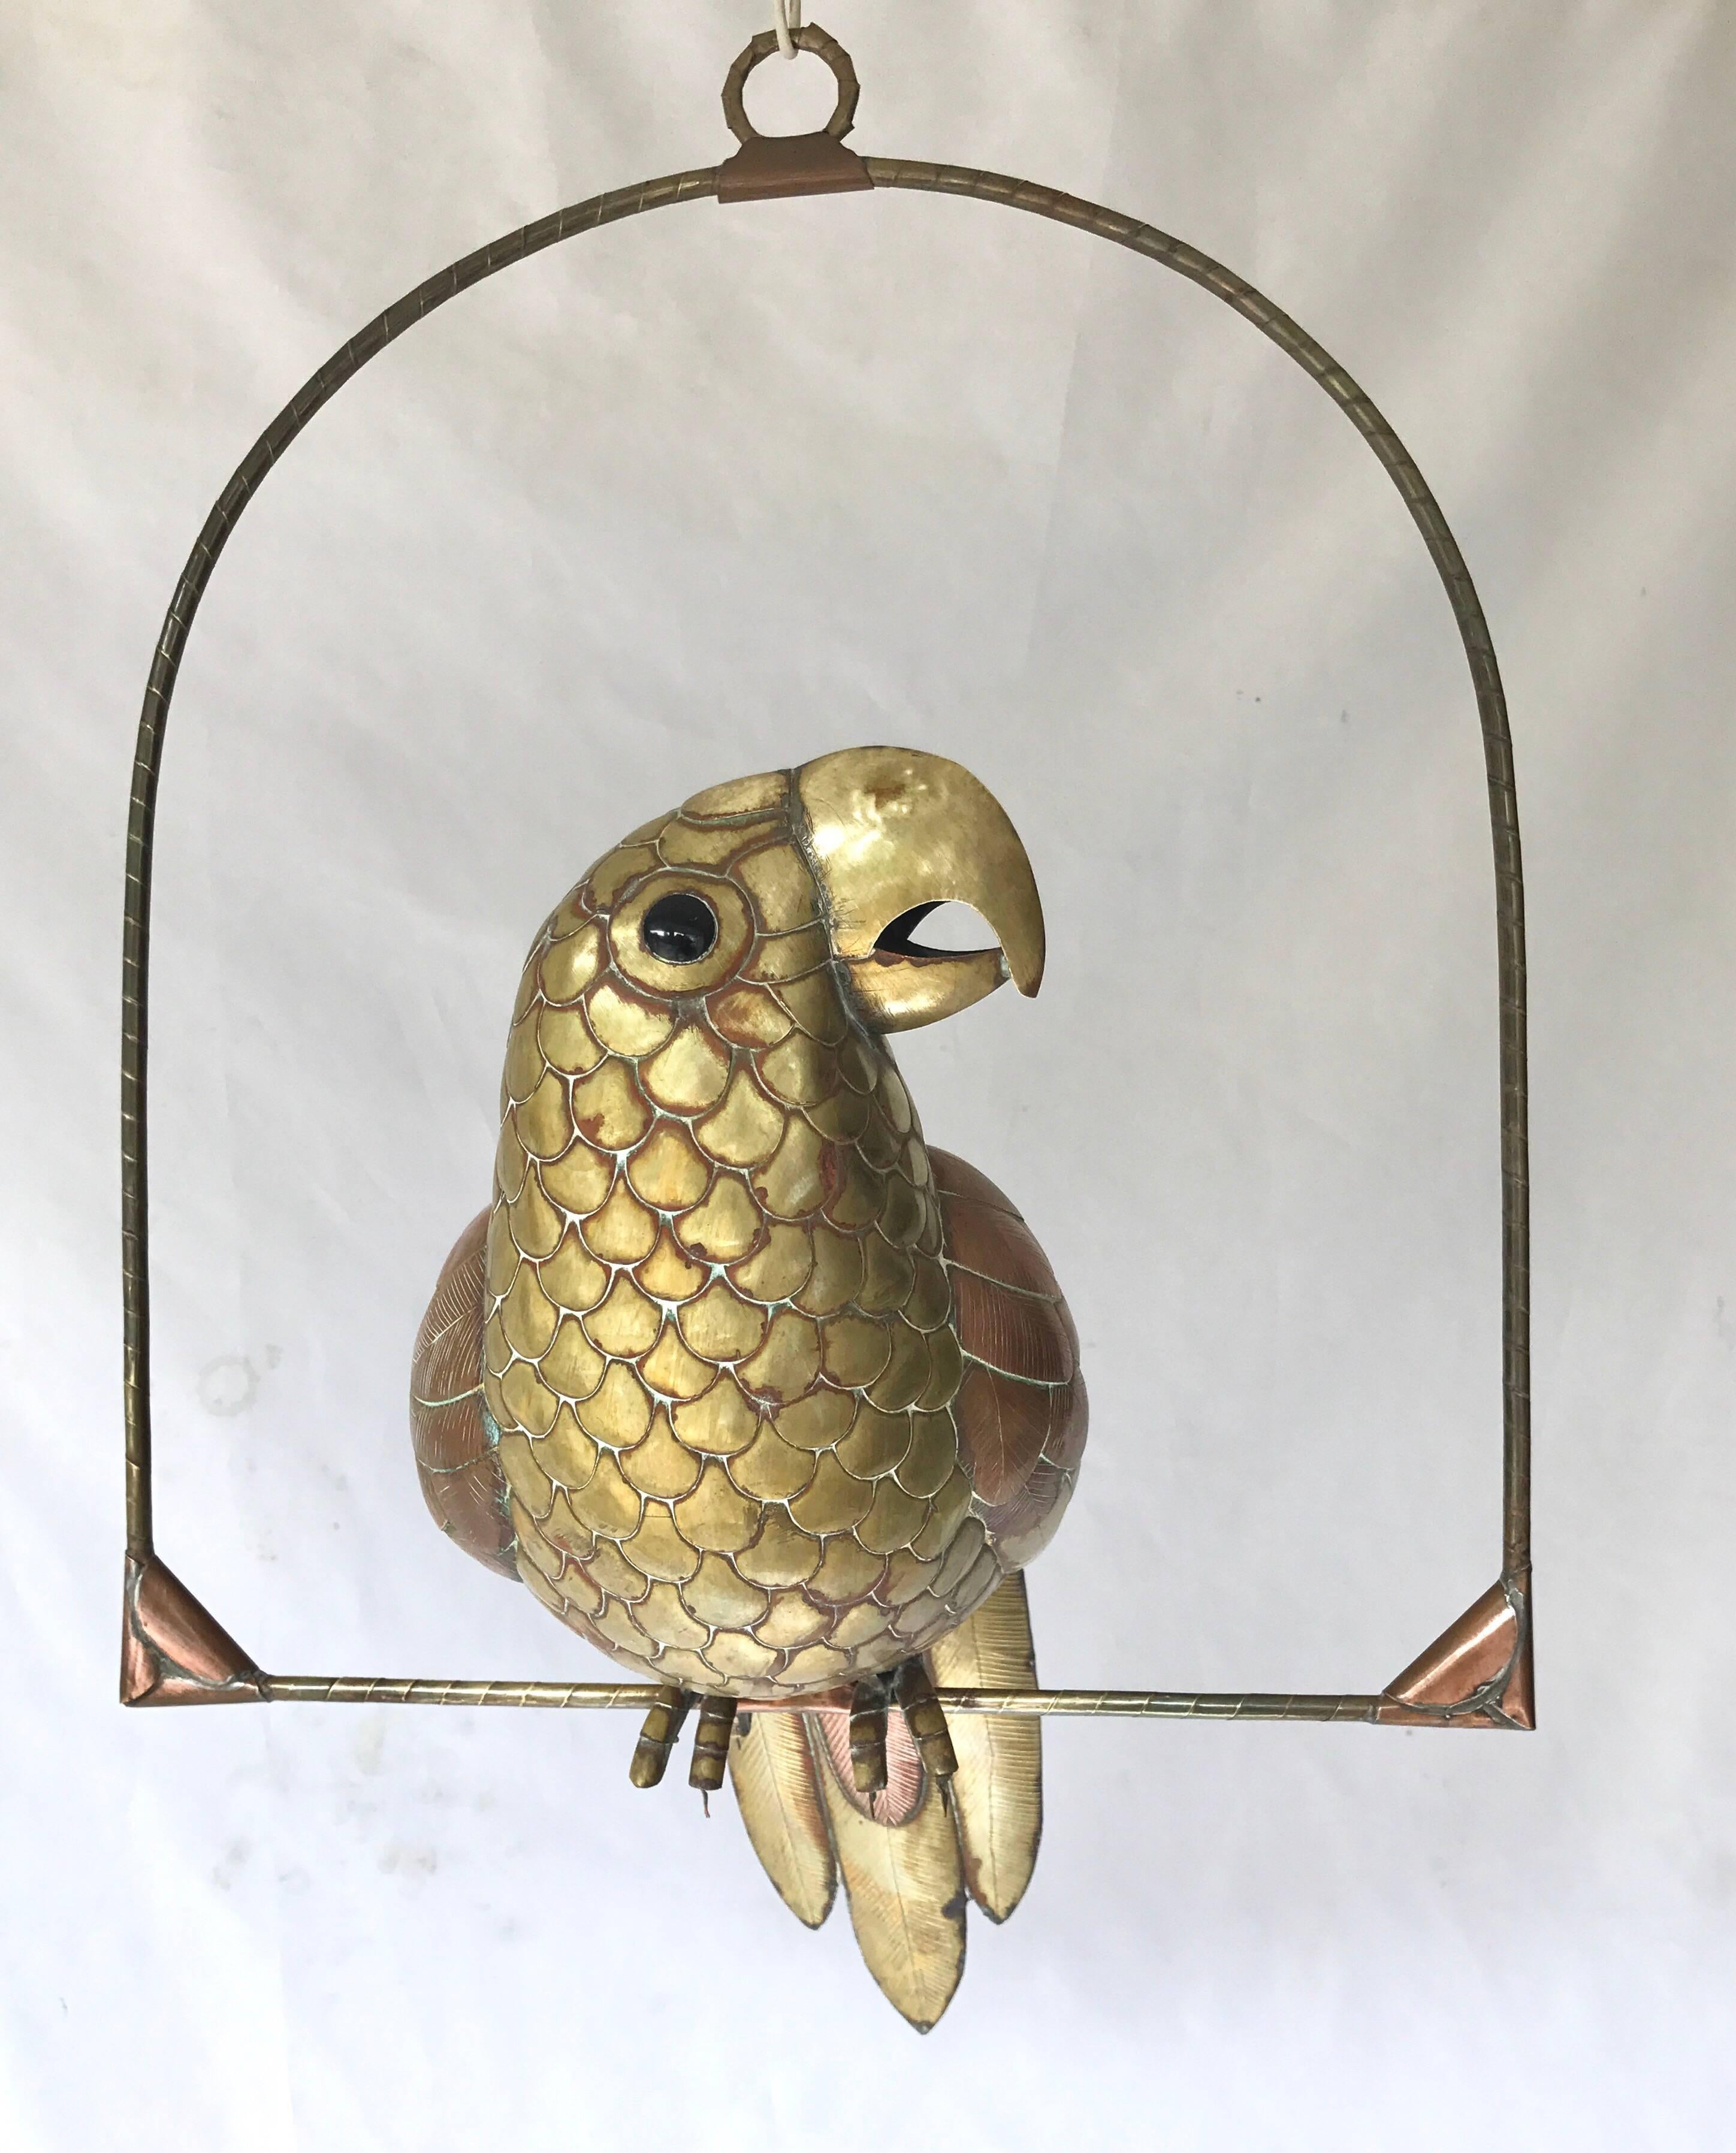 An eye-catching brass and copper parrot on perch attributed to Sergio Bustamante. High quality, hand hammered parts and construction teamed with black glass eyes, give this bird presence and wonderful scale.
Body measures 10